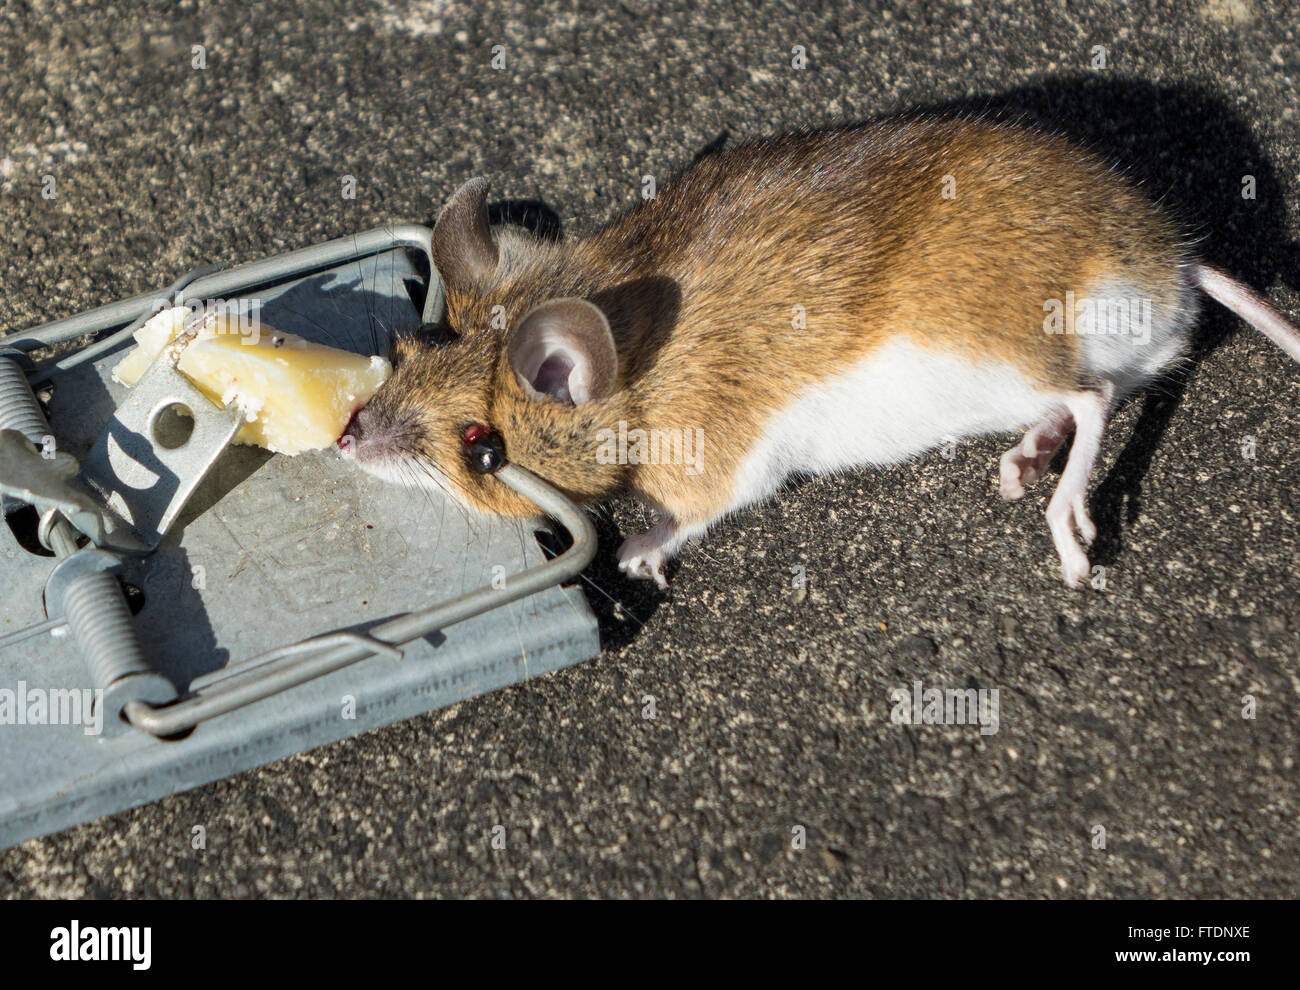 https://c8.alamy.com/comp/FTDNXE/mouse-caught-in-trap-FTDNXE.jpg